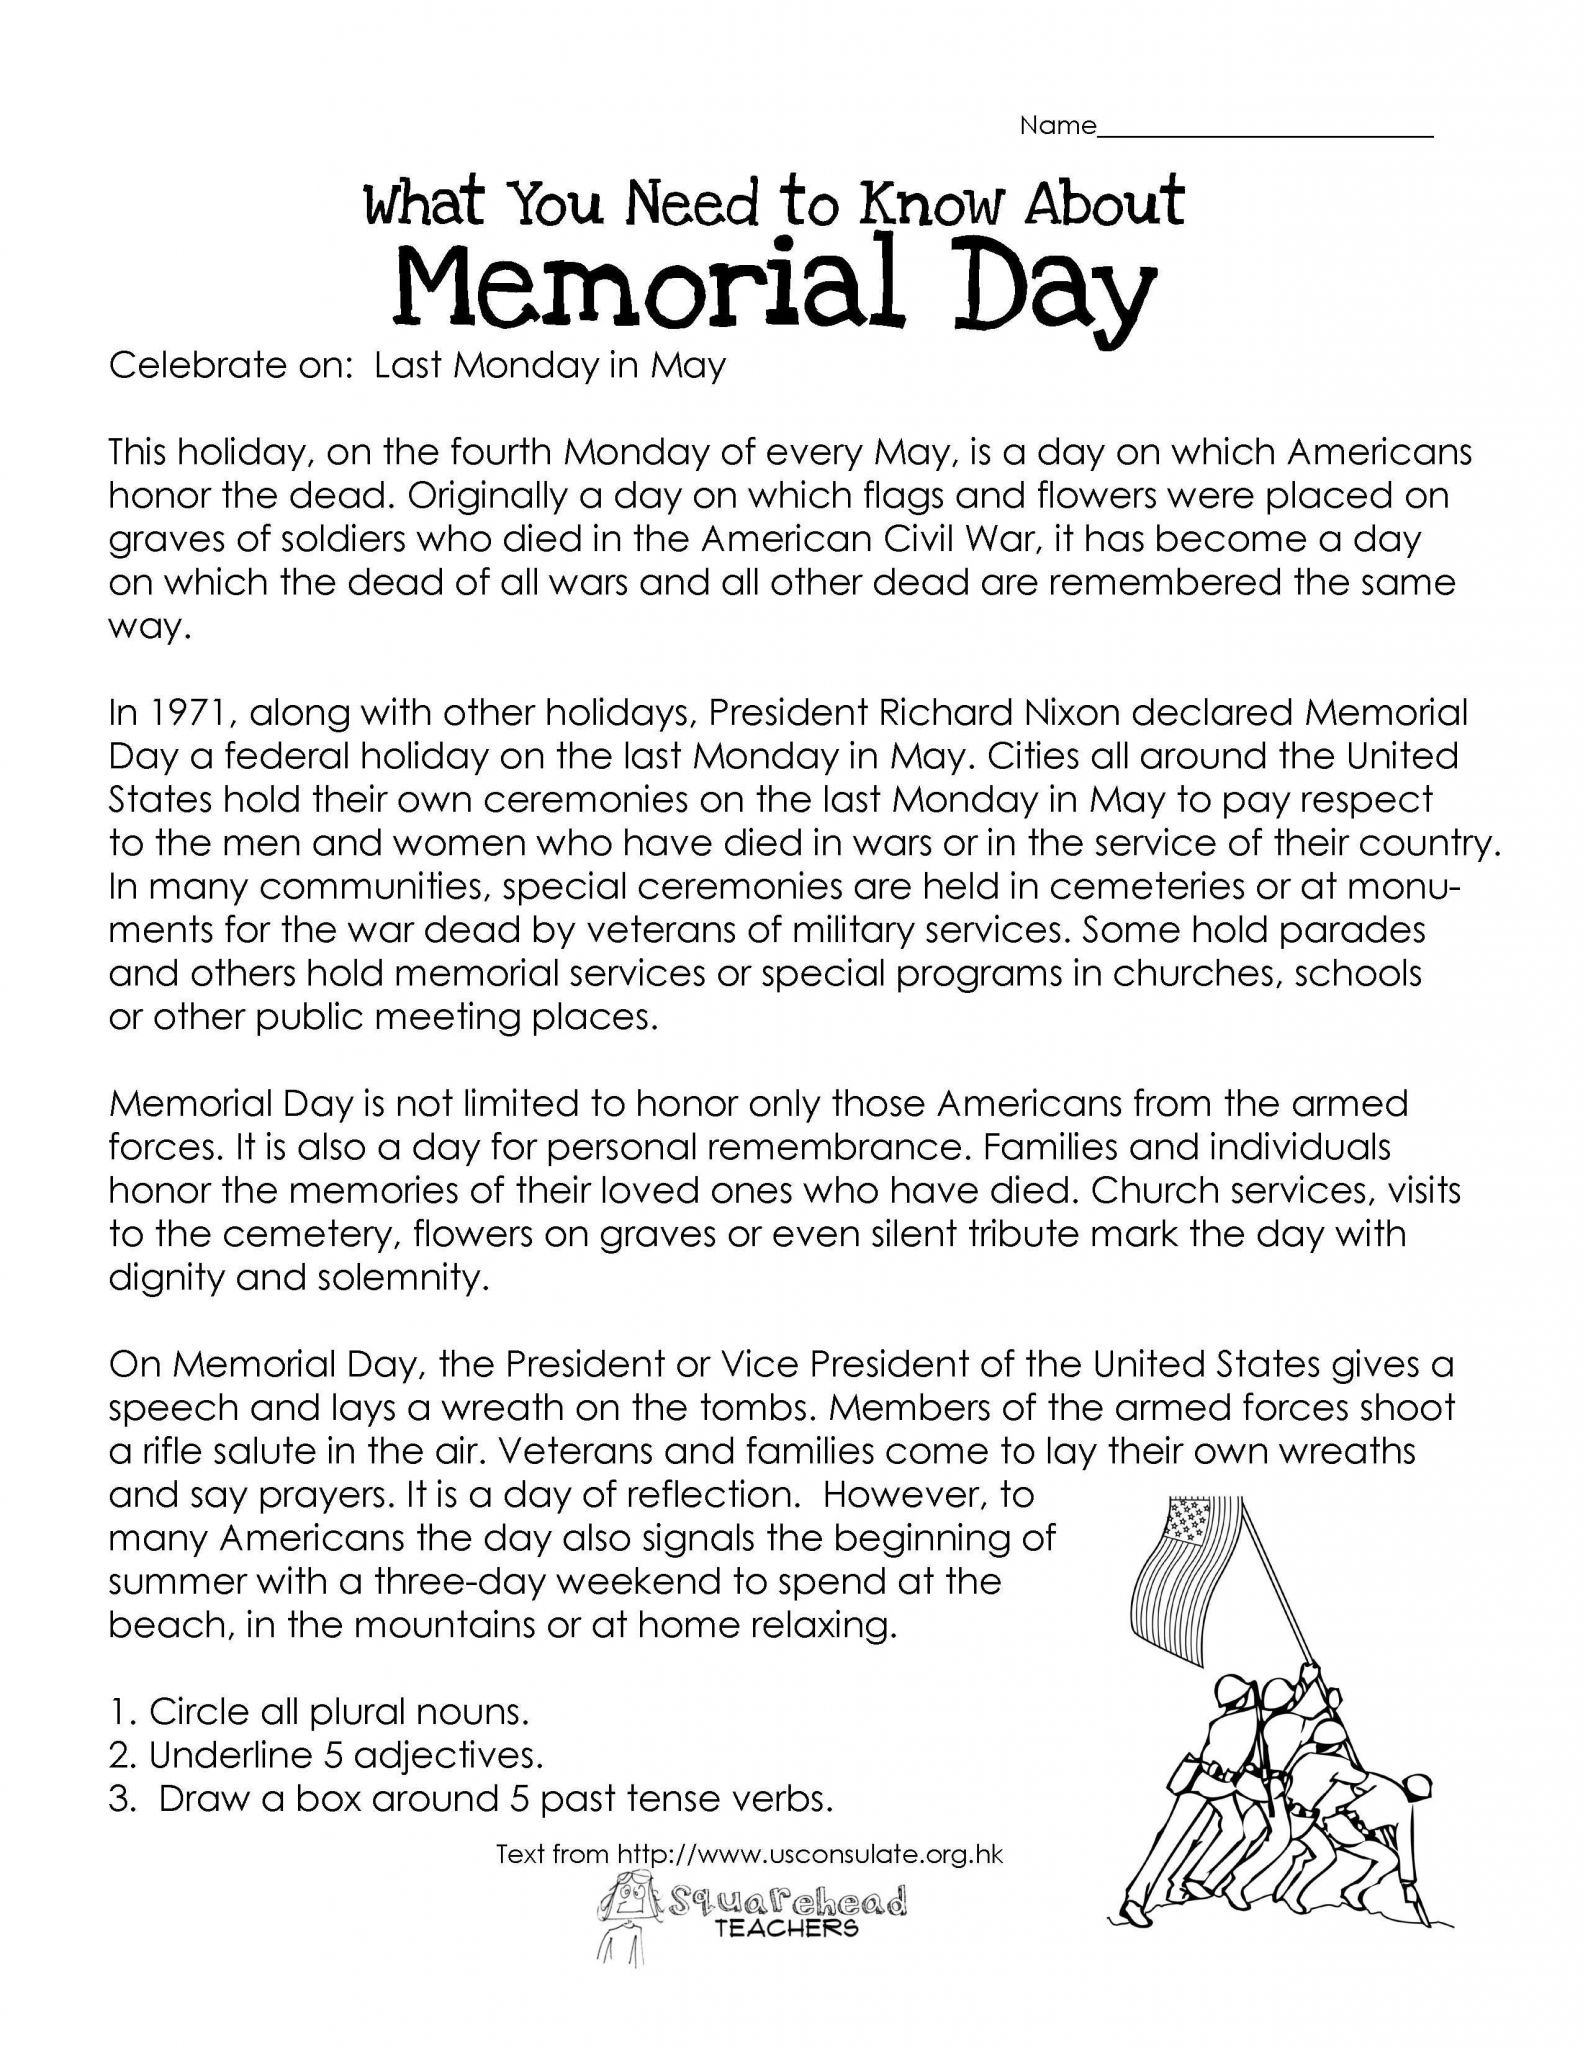 American Civil War Reading Comprehension Worksheet Answers and Memorial Day Free Worksheet